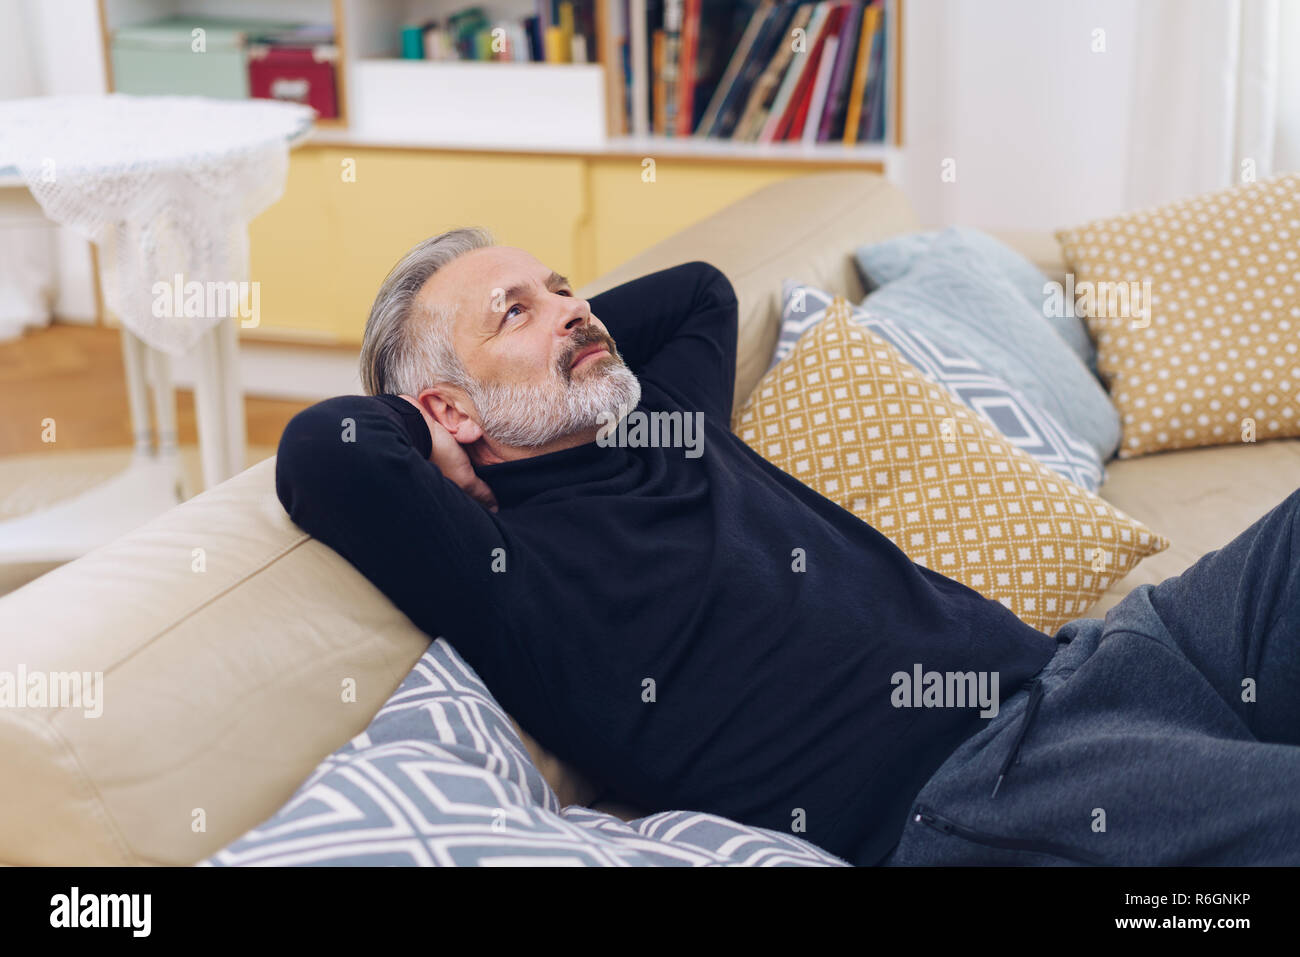 Relaxed middle-aged man looking up and daydreaming about future plans while sitting on the sofa at home Stock Photo